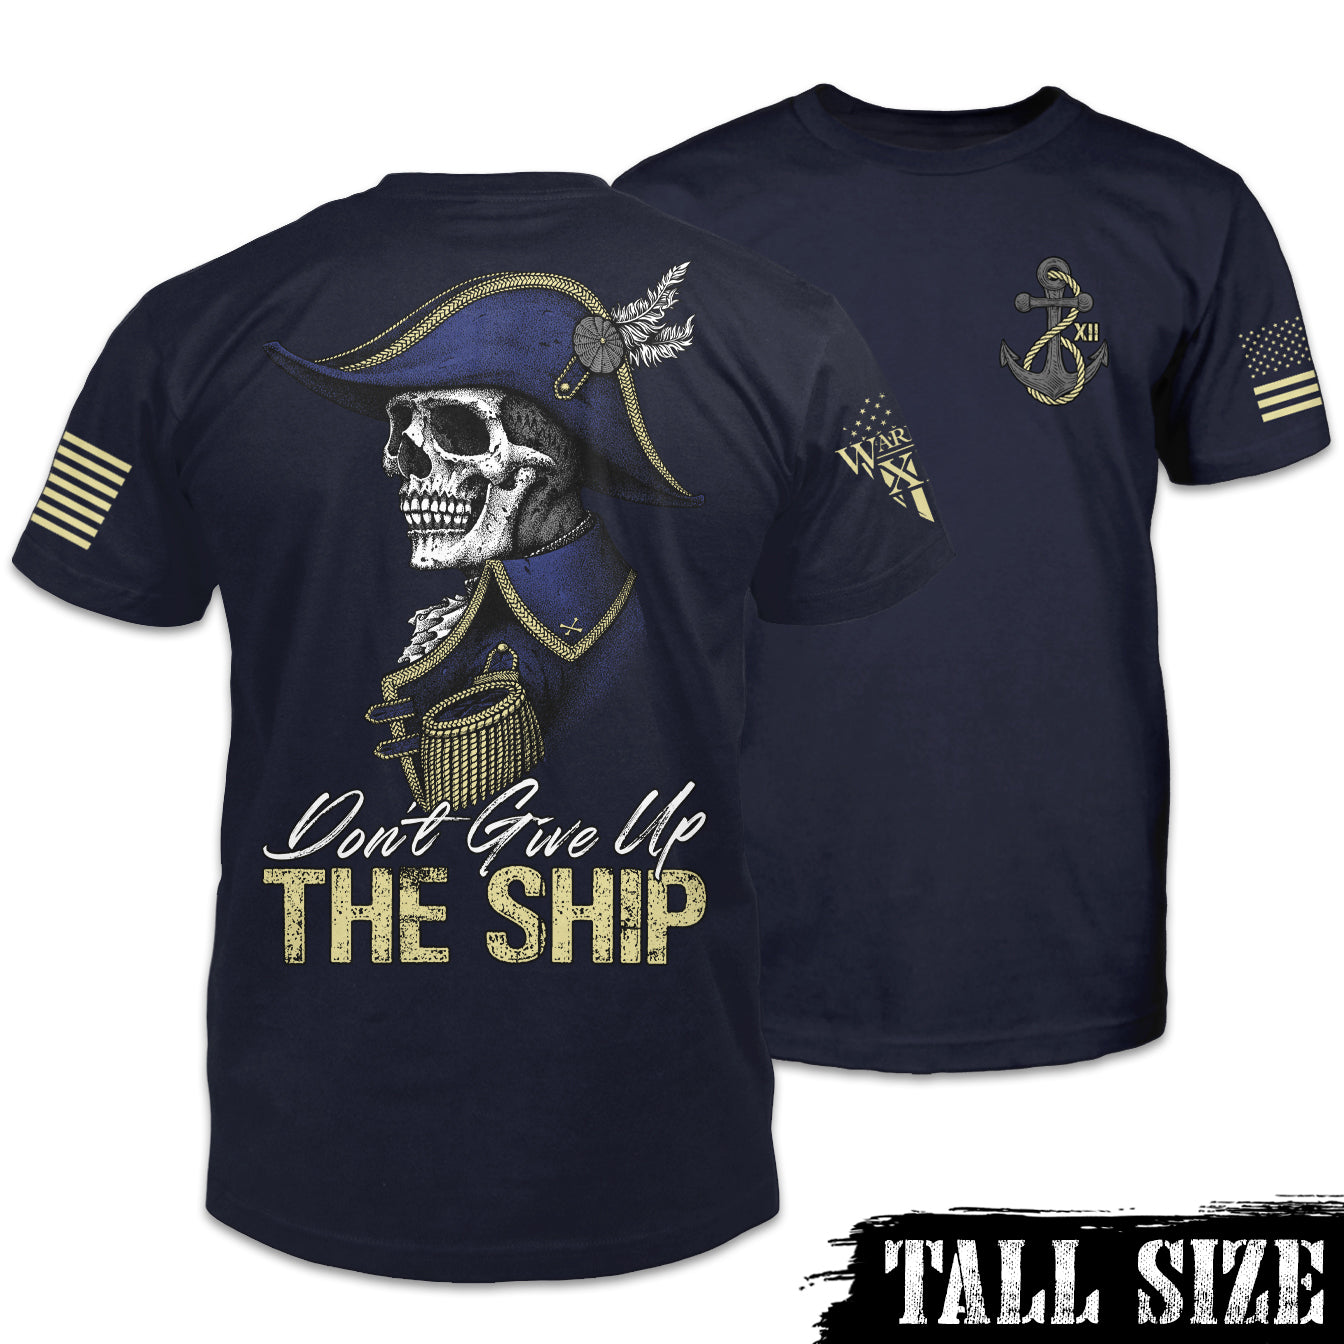 Front and back navy blue tall size shirt with the words "Don't give up the ship" and a skeleton of Captain James Lawrence printed on the shirt.